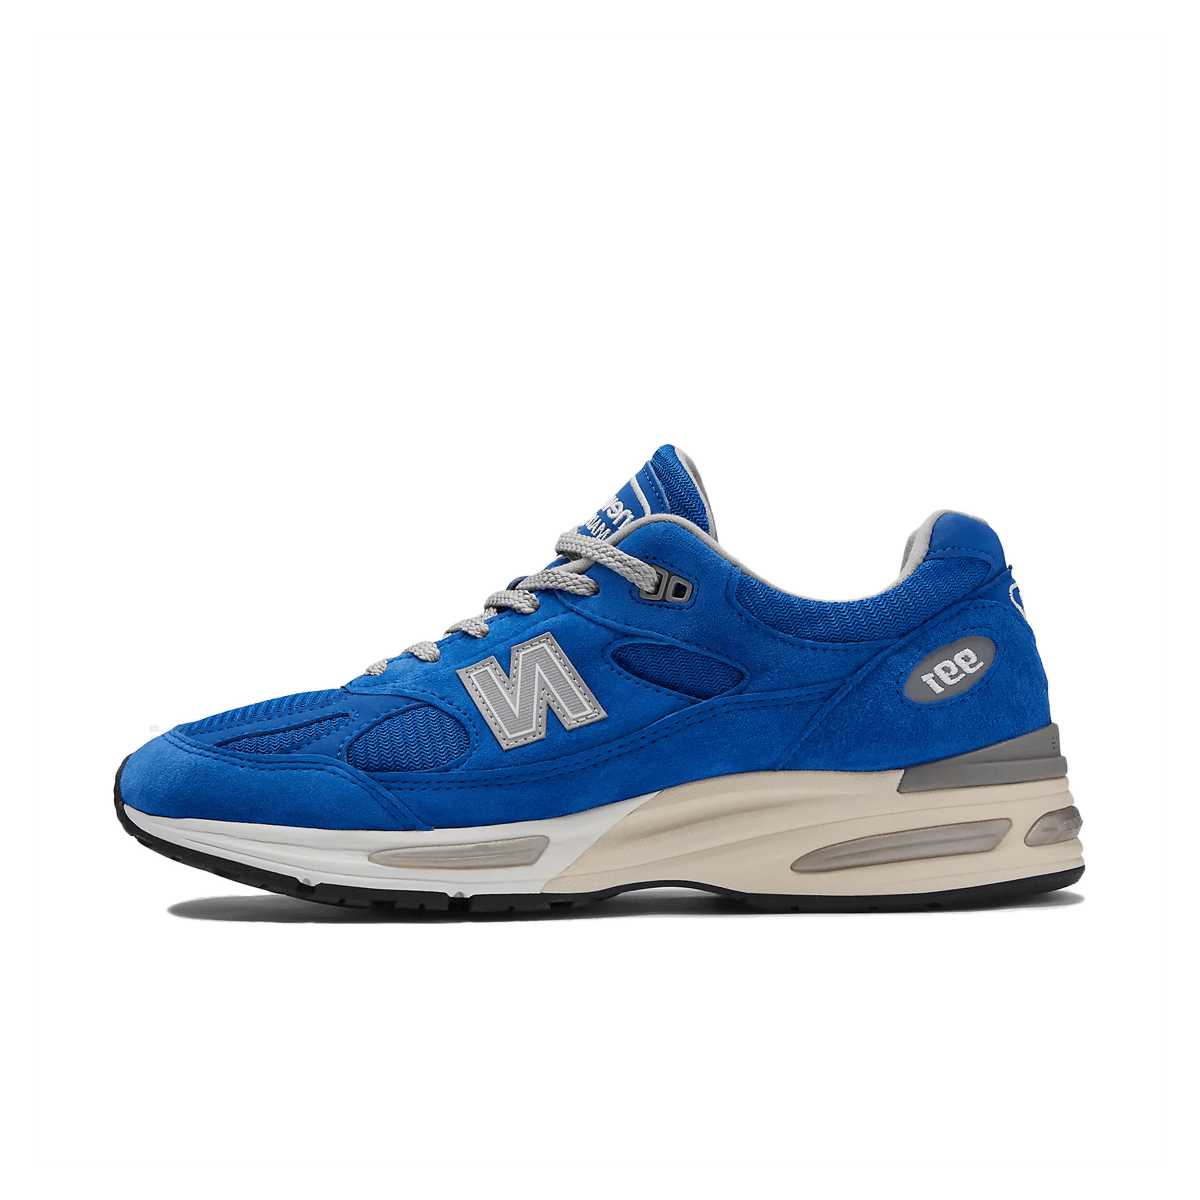 New Balance 991v2 'Blue Silver' - Made in UK